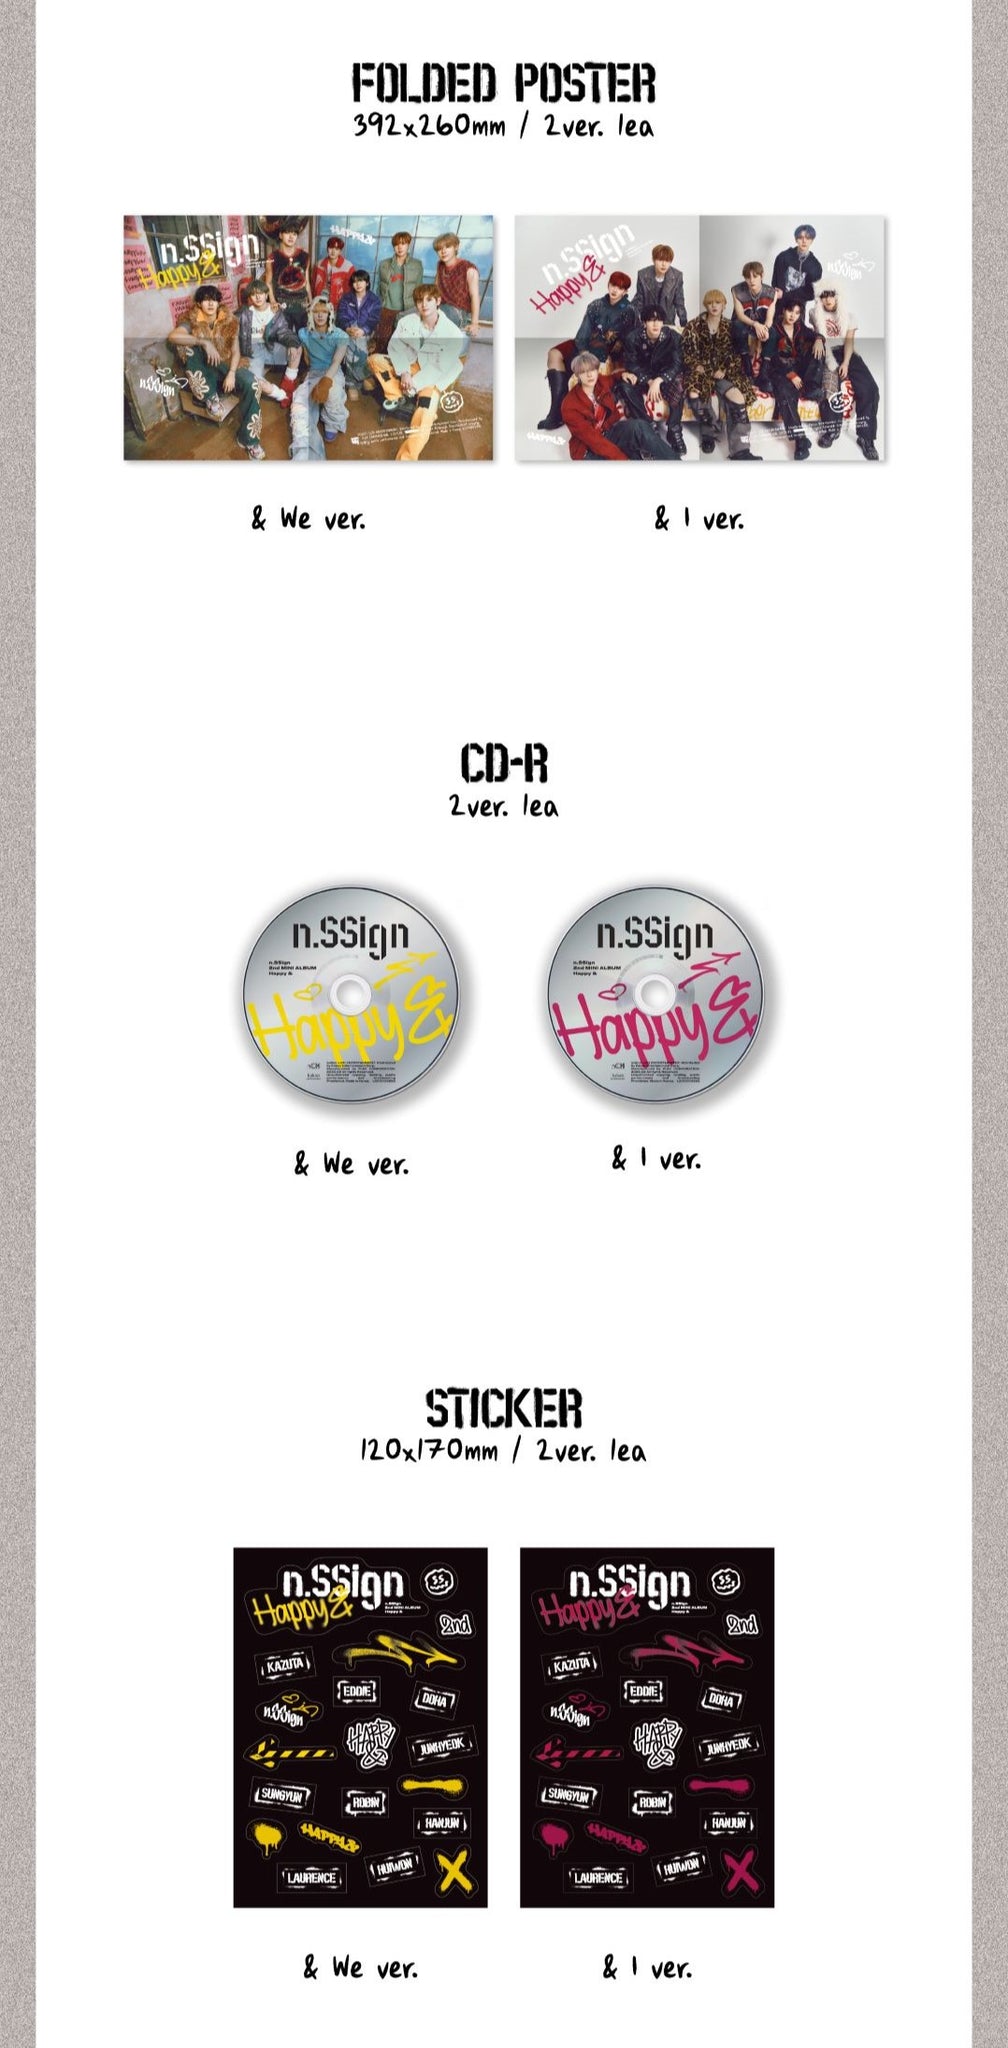 n.SSign 2nd Mini Album Happy & Inclusions Folded Poster CD Sticker